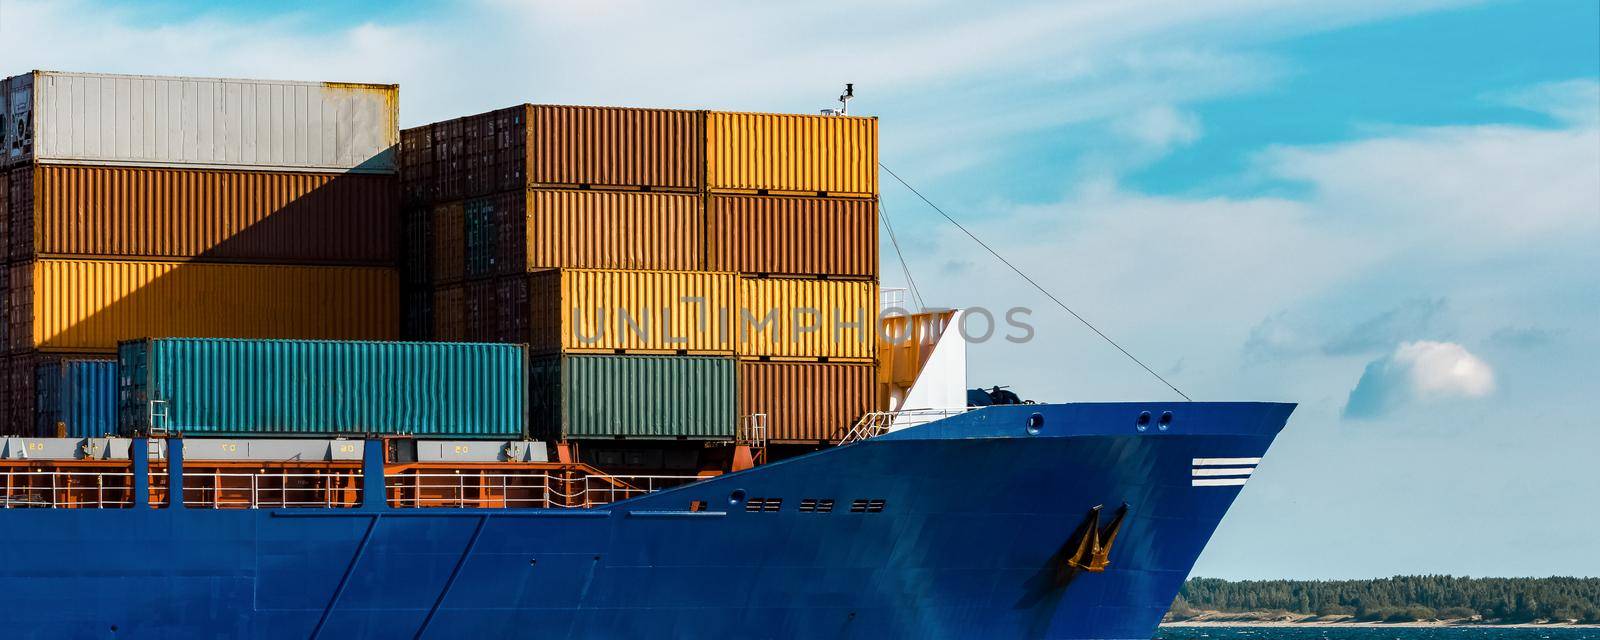 Blue container ship in travel. Logistics and freight industry